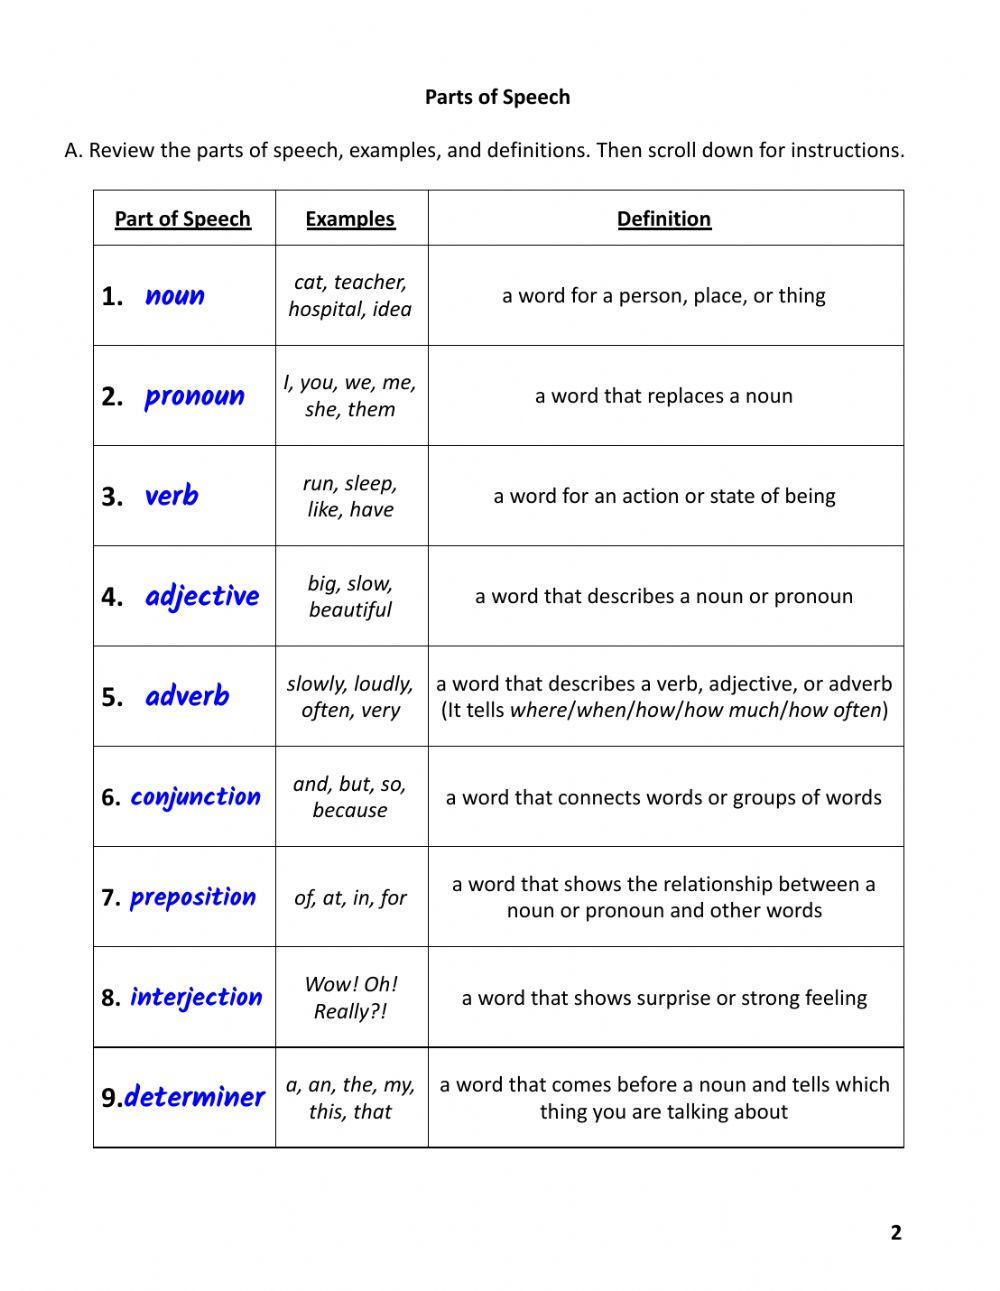 Parts of Speech Labeling